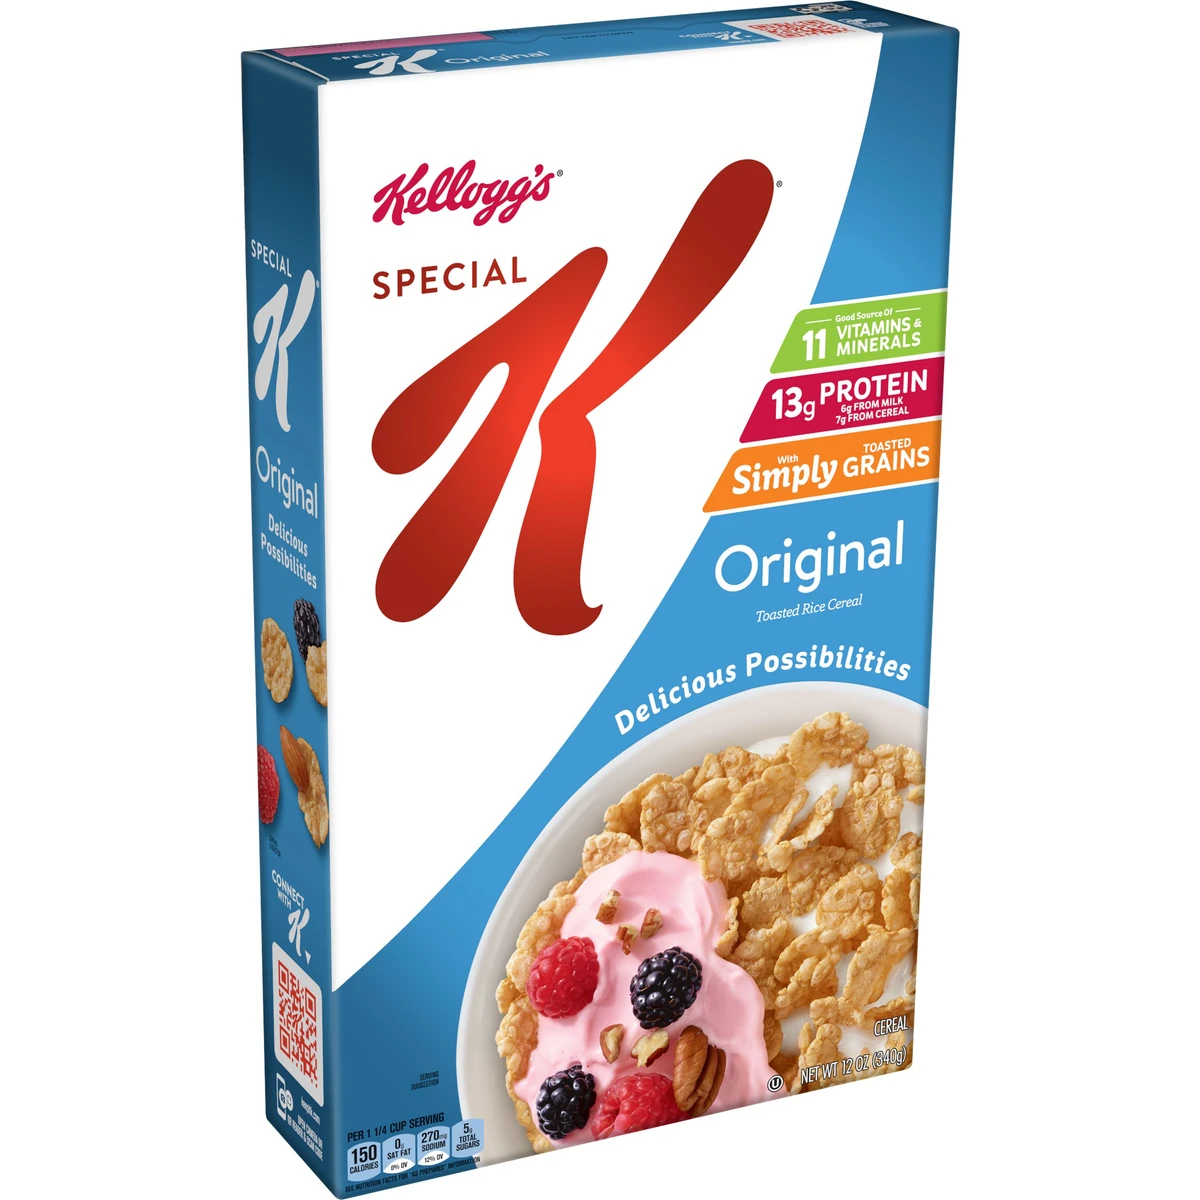 Special K Toasted Rice Cereal, Original